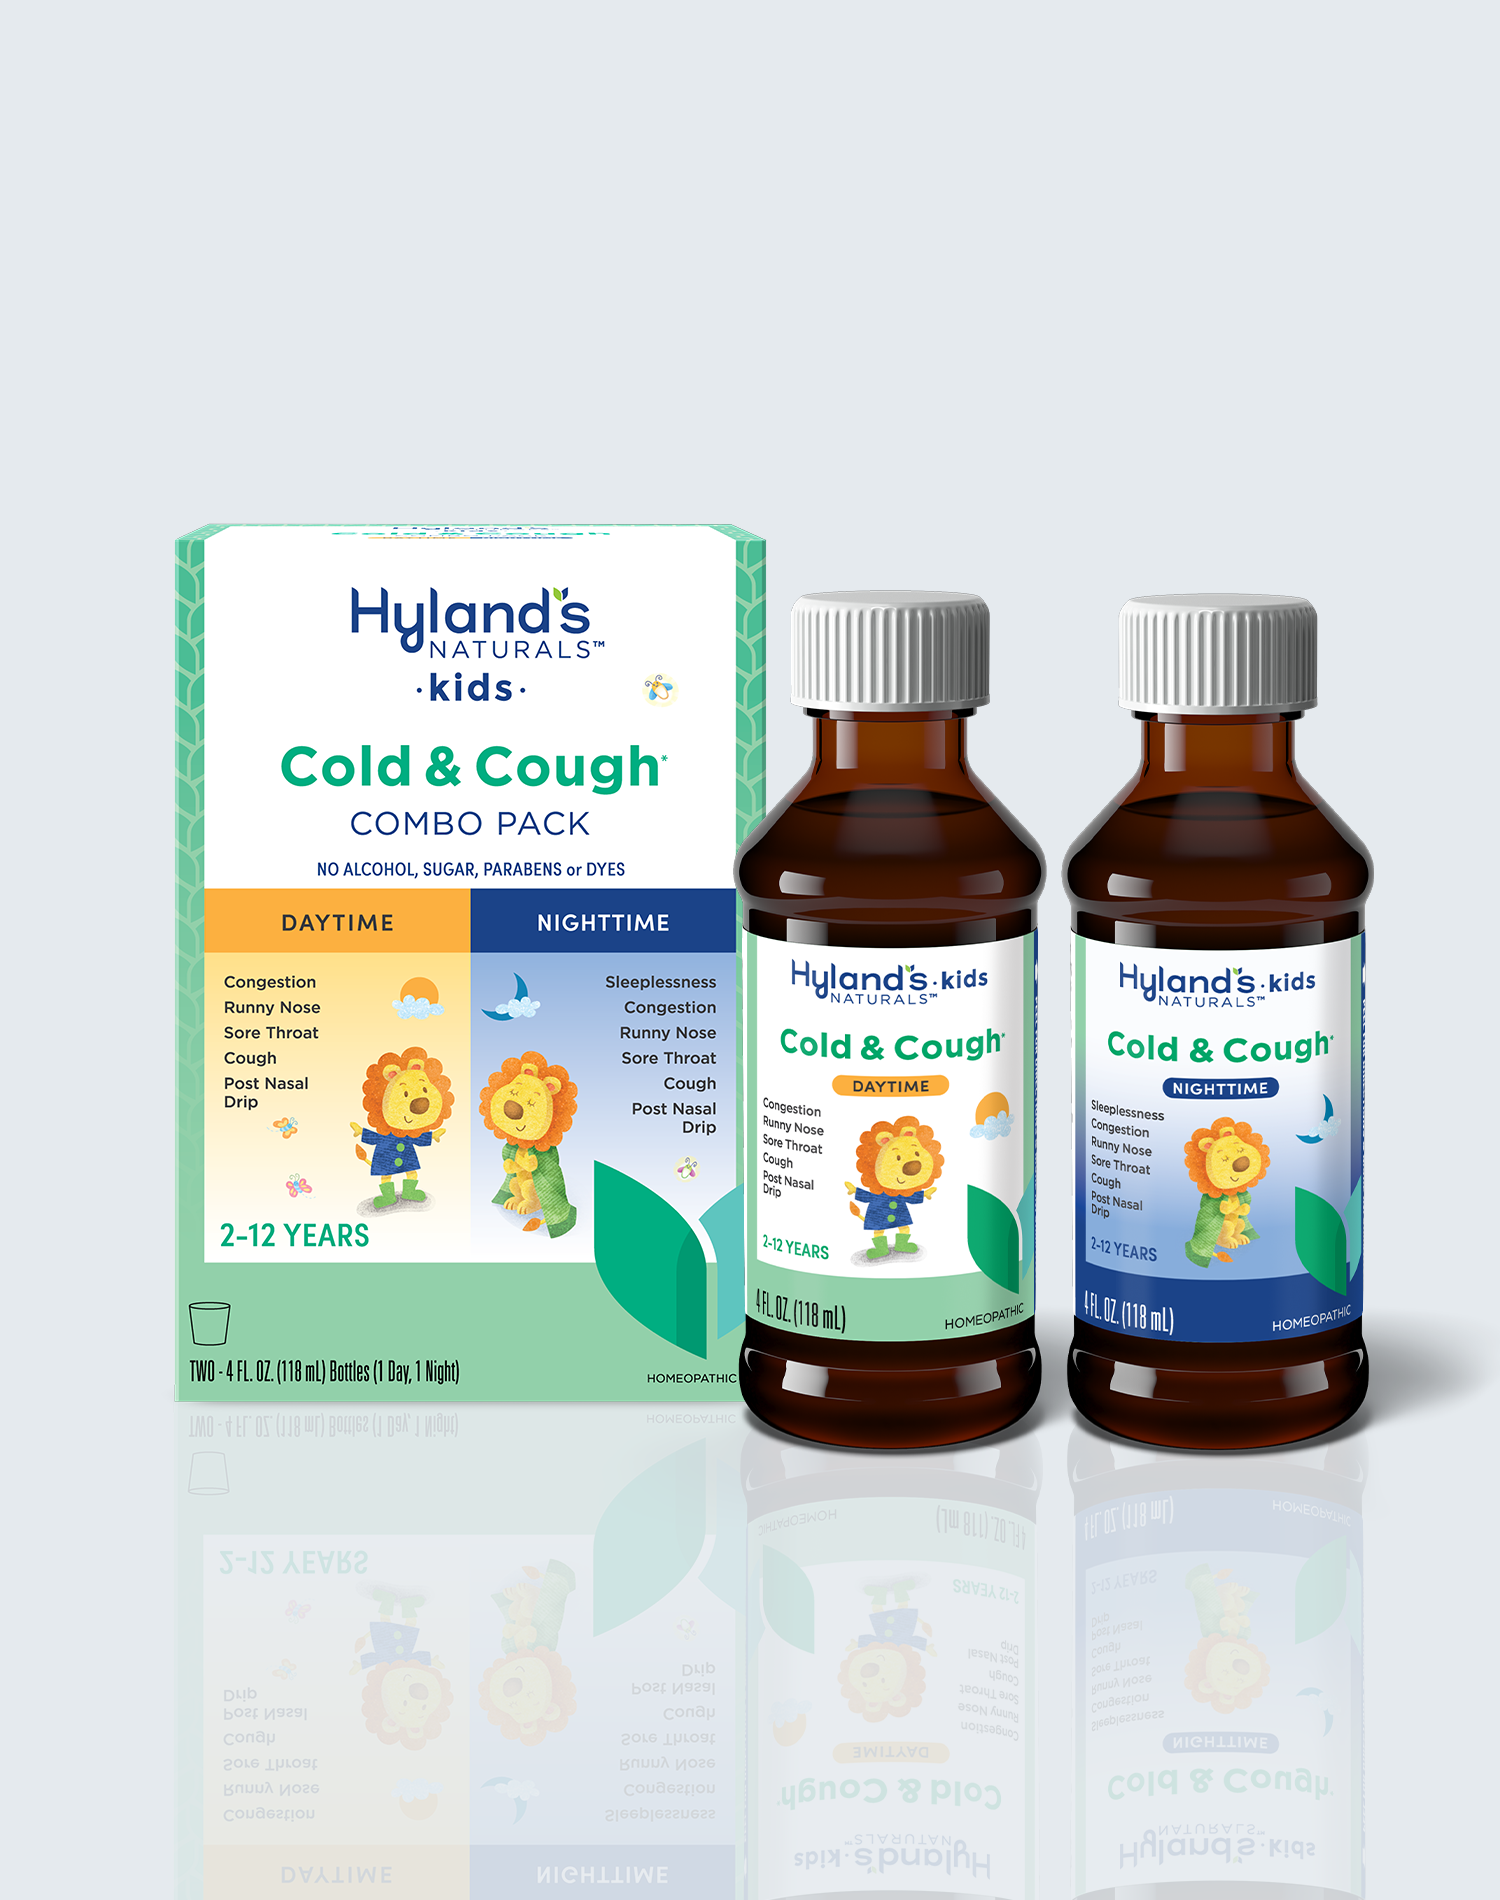 Kids Cold & Cough Combo Pack